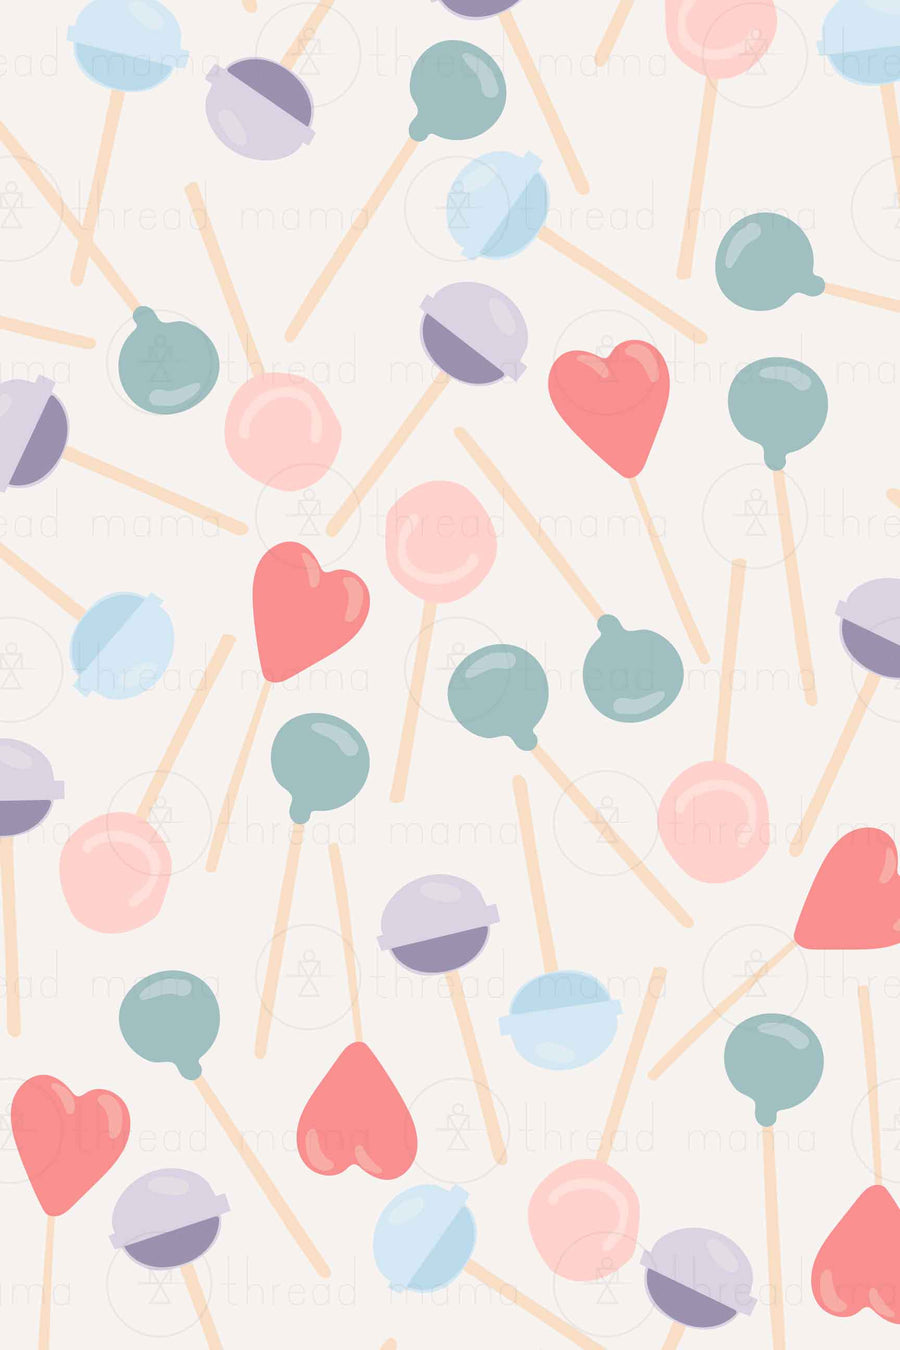 Repeating Pattern 57 (Seamless)